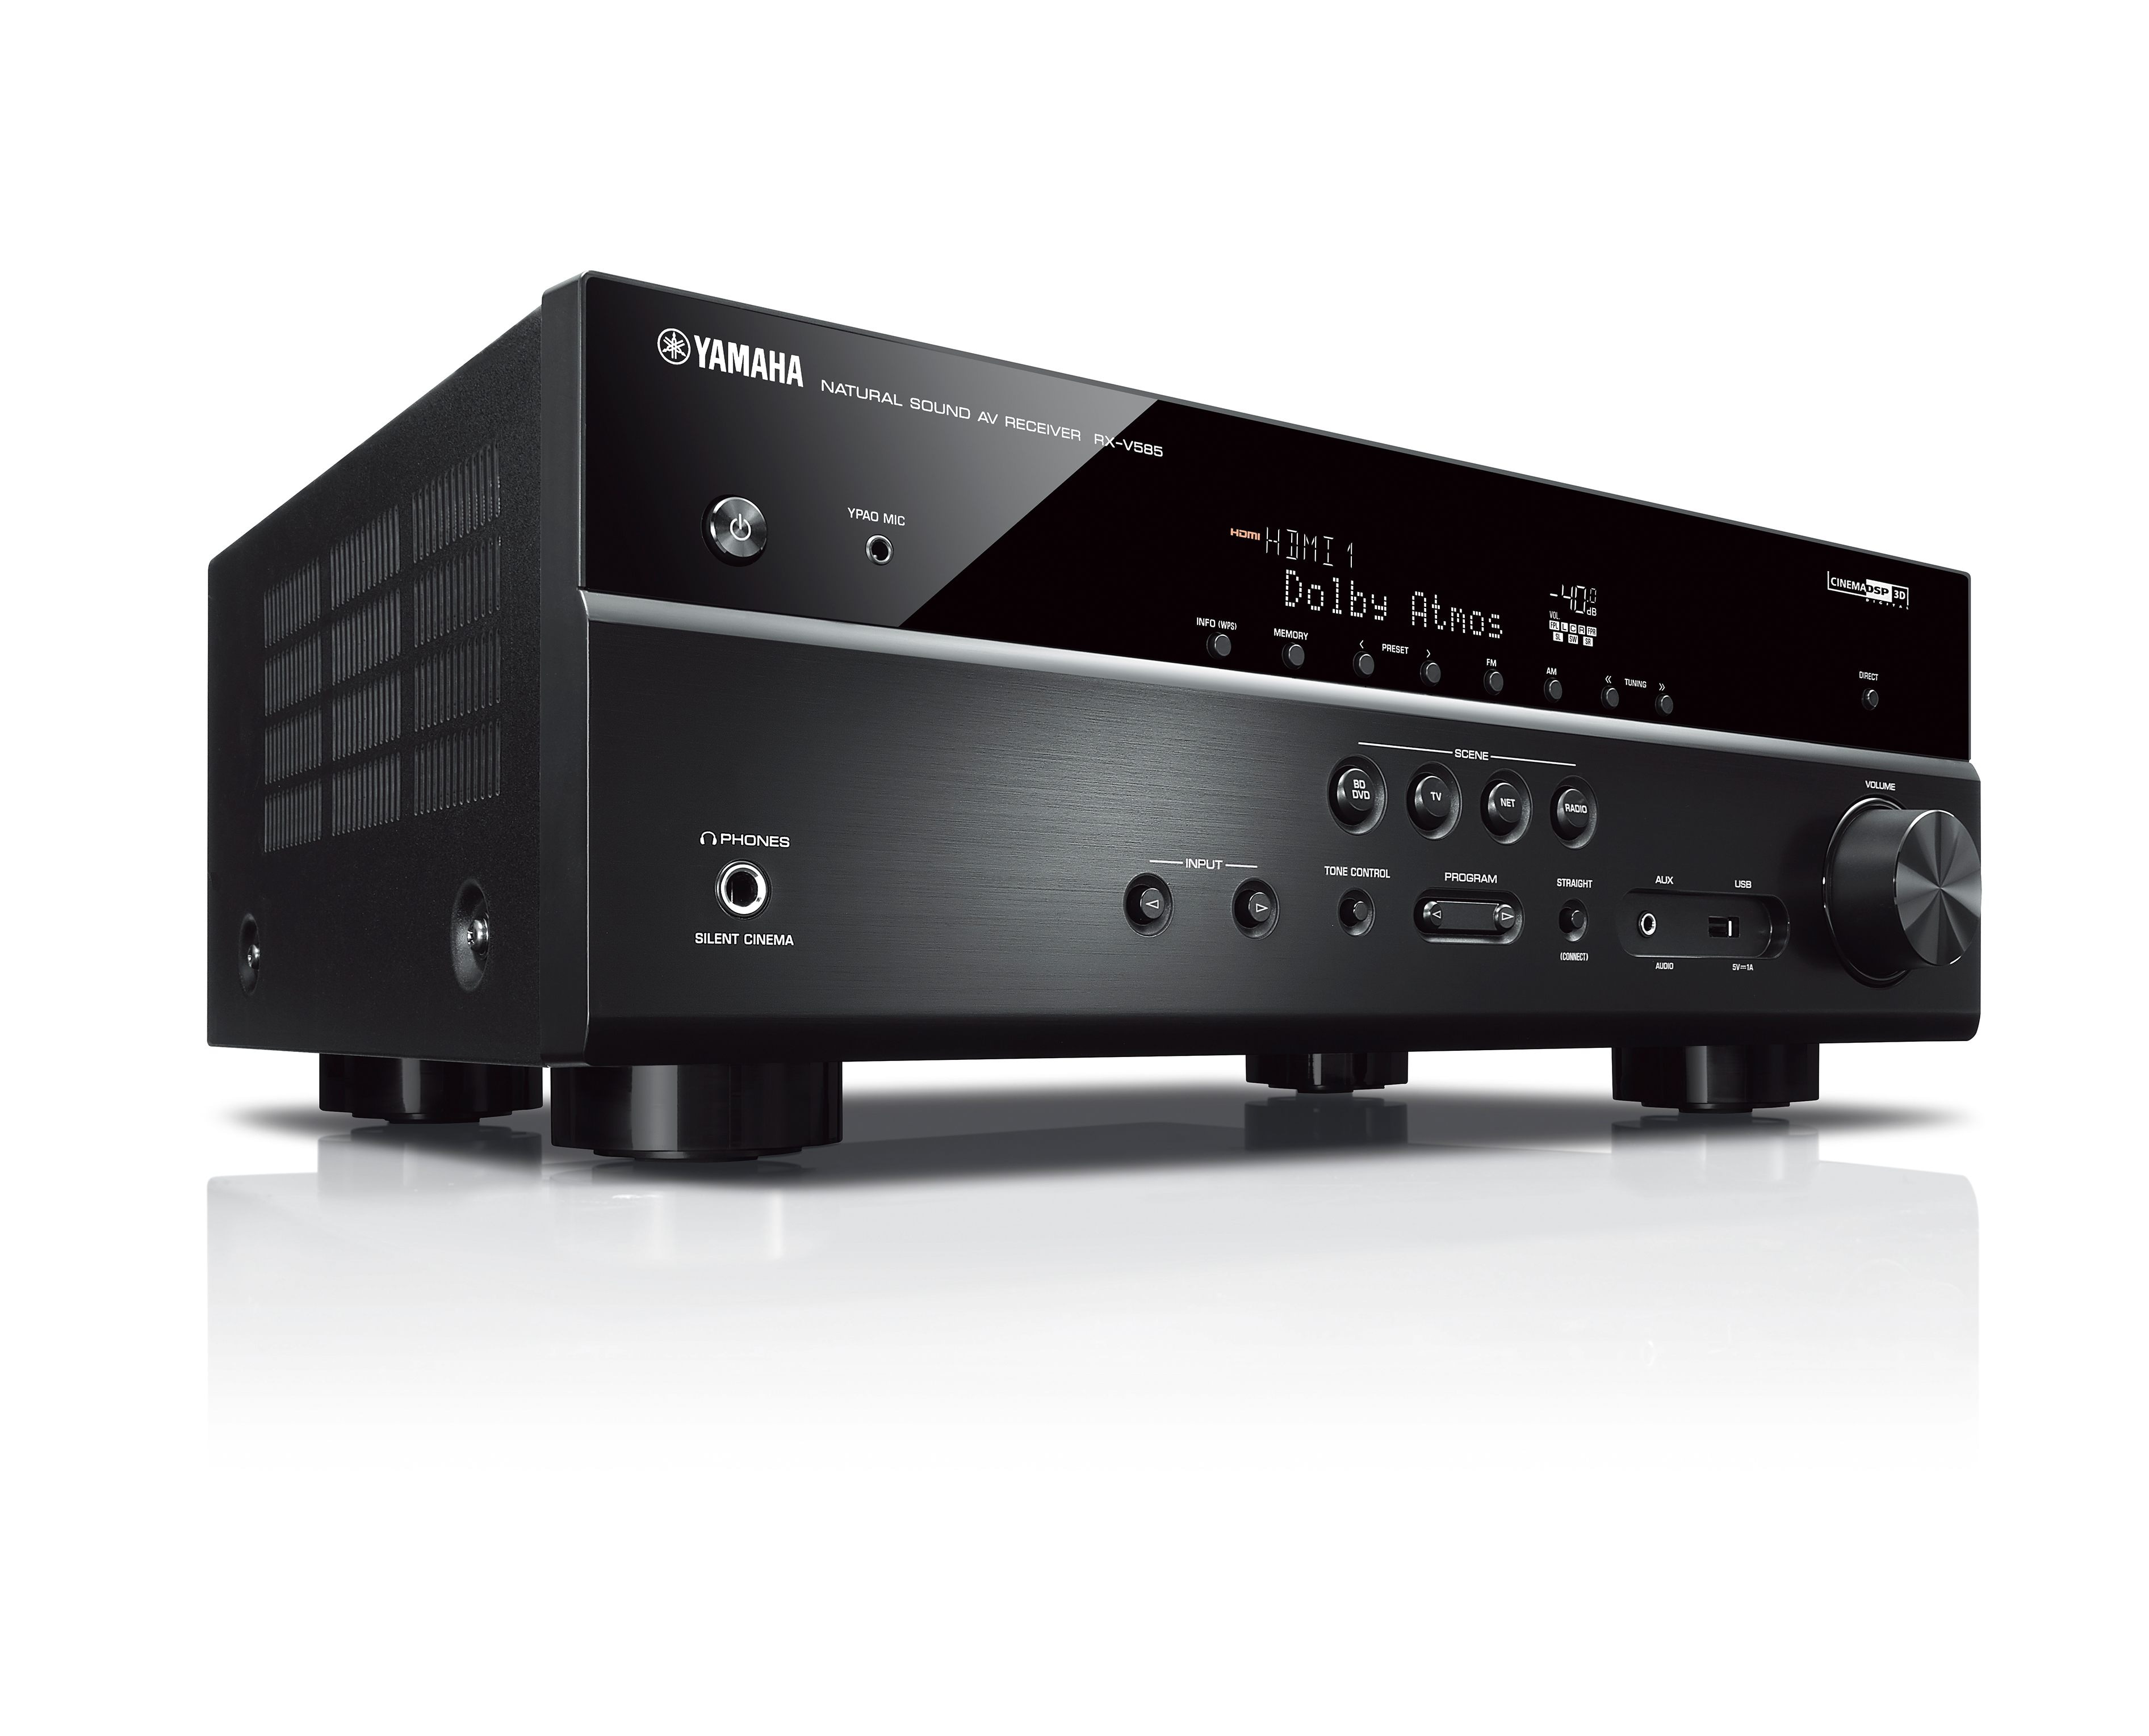 RX-V585 - Support - AV Receivers - Audio & Visual - Products